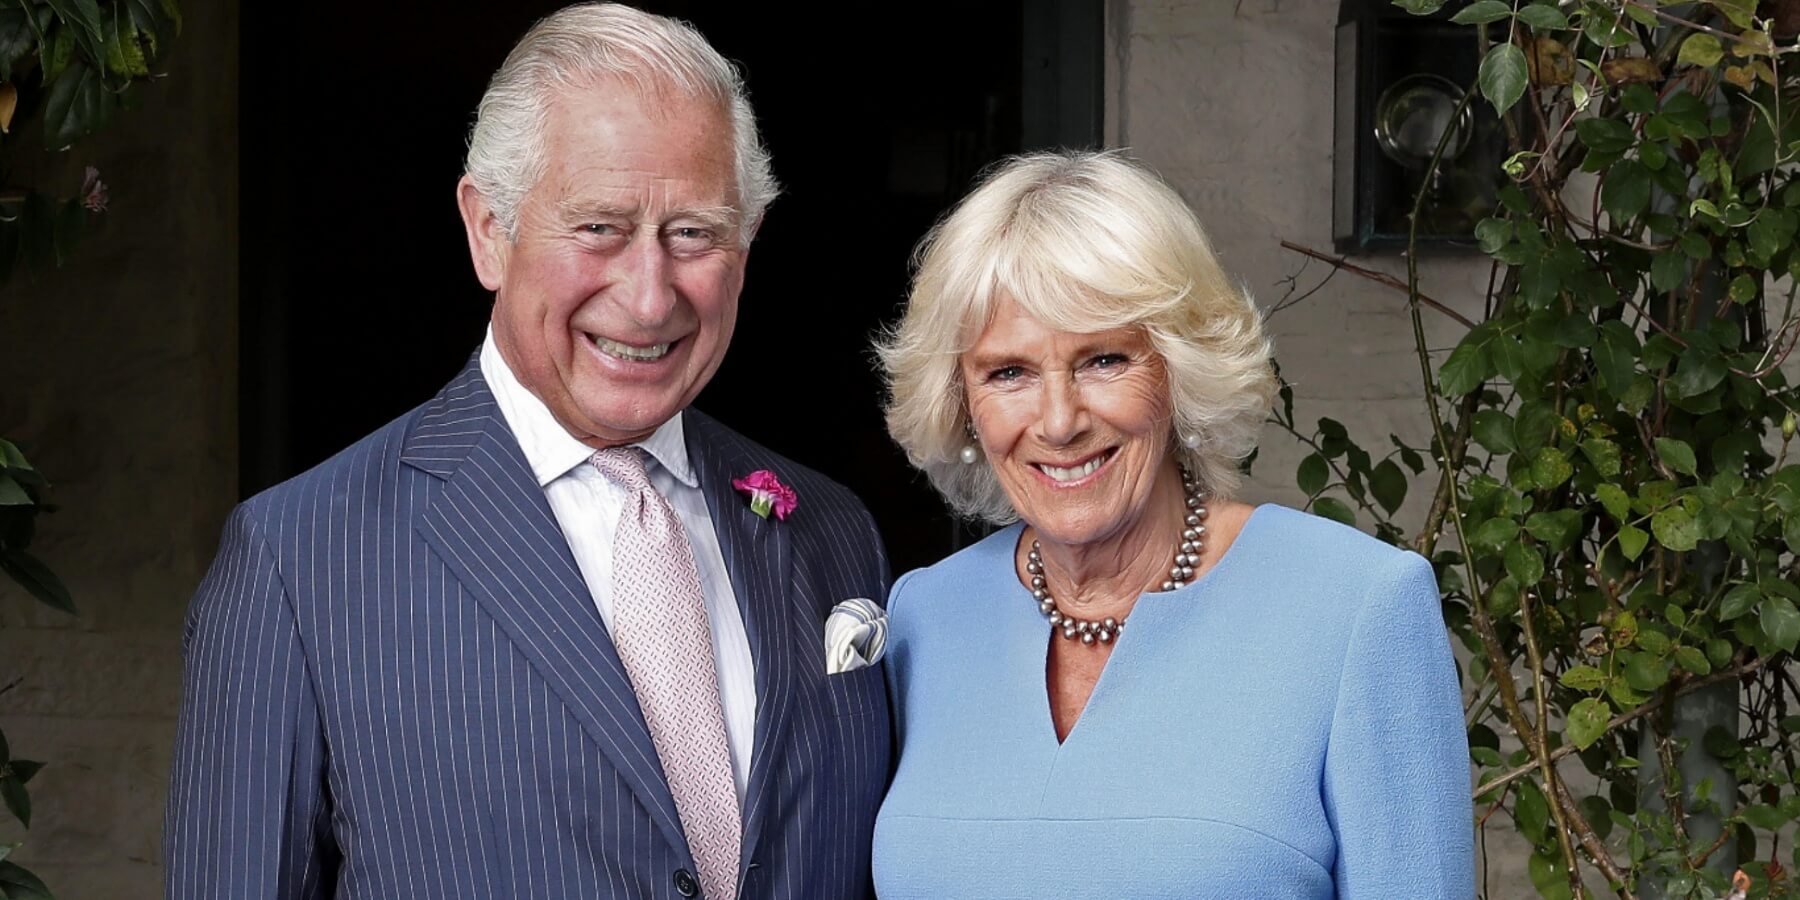 King Charles and Camilla Parker Bowles in an official portrait taken in 2019